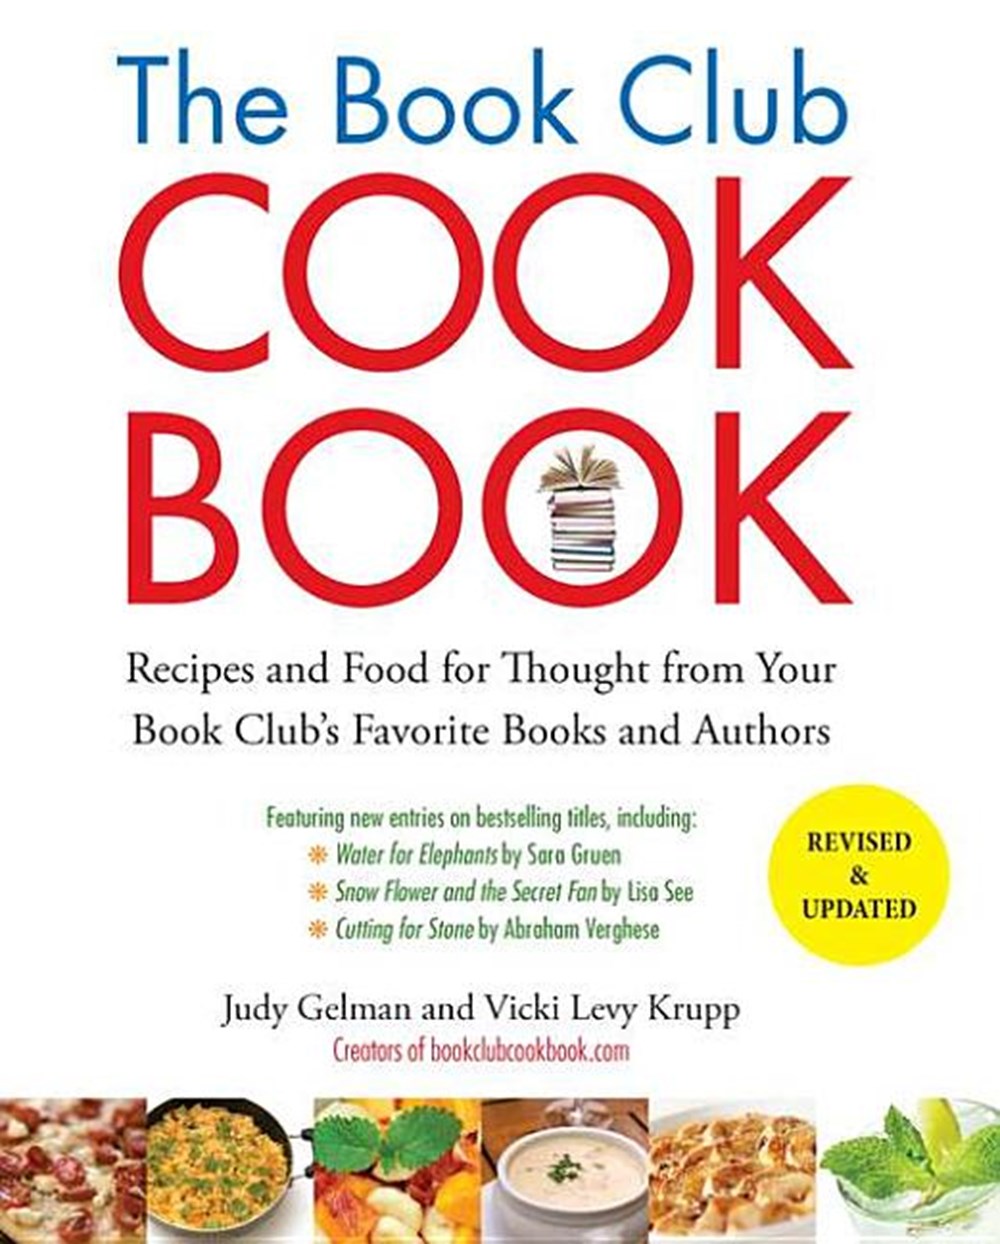 Book Club Cookbook, Revised Edition: Recipes and Food for Thought from Your Book Club's FavoriteBook